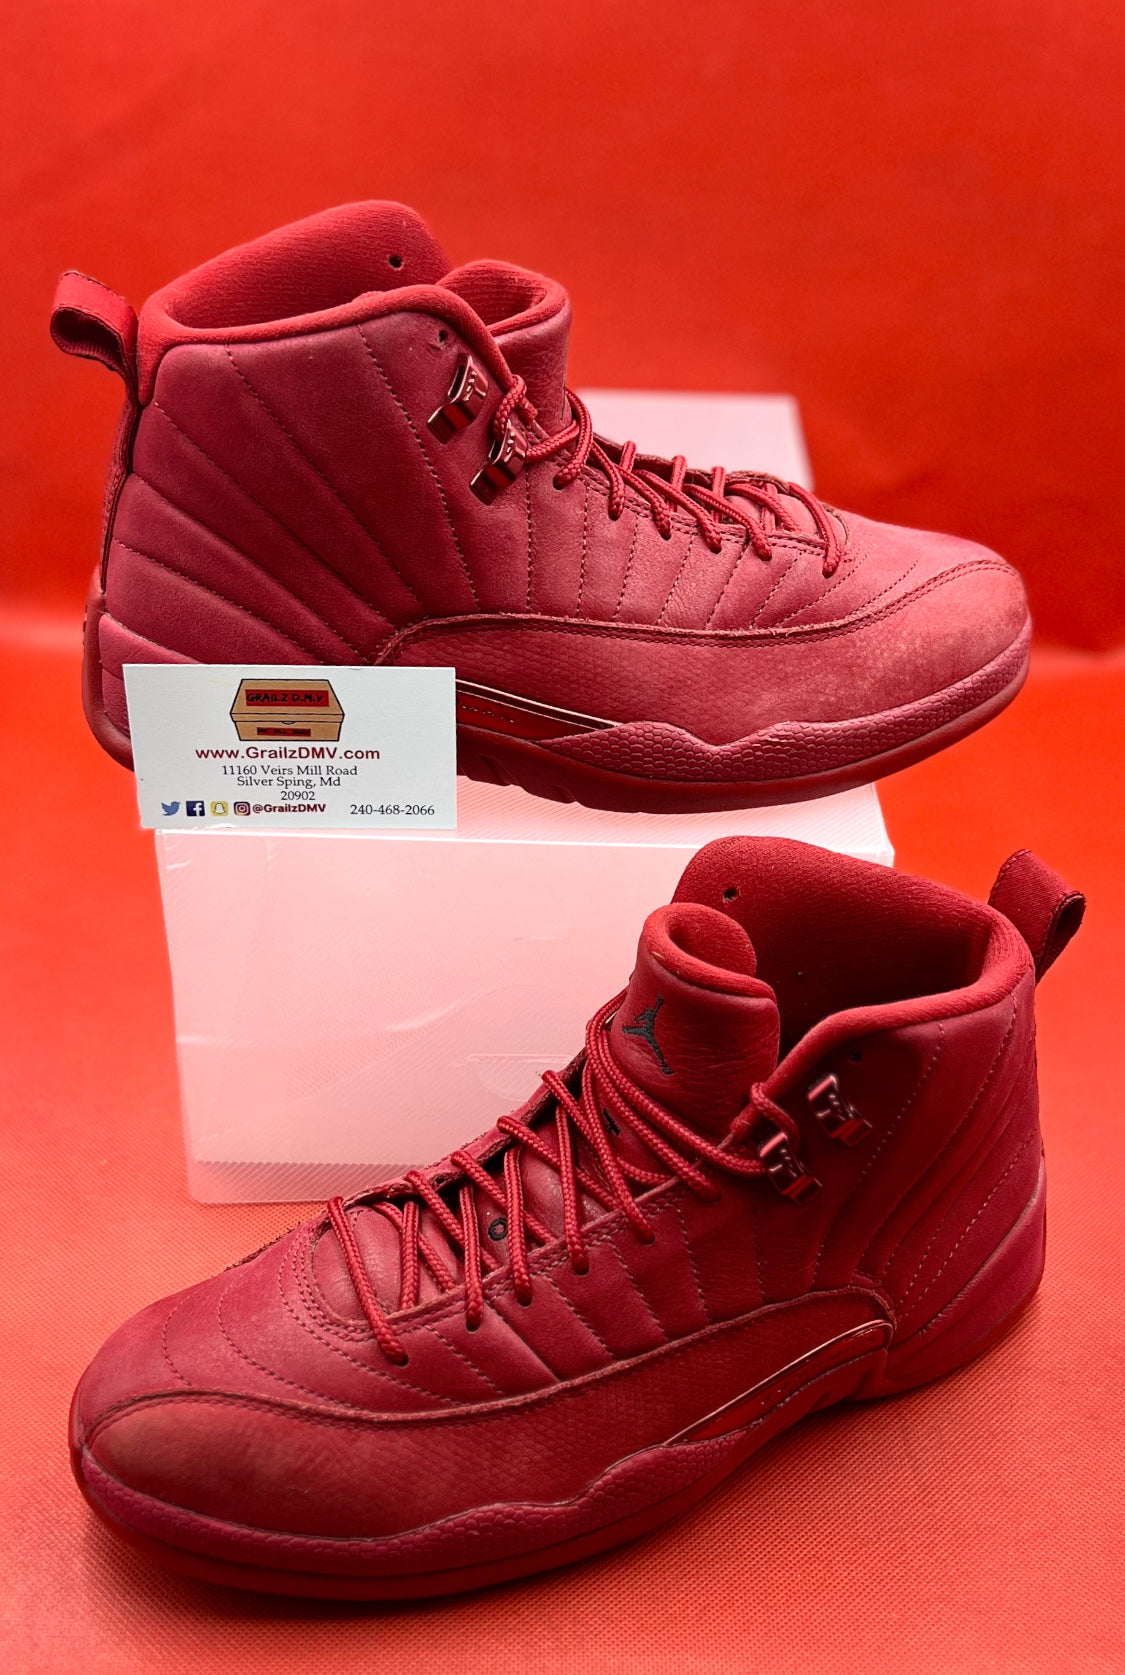 Gym Red 12s Size 8.5